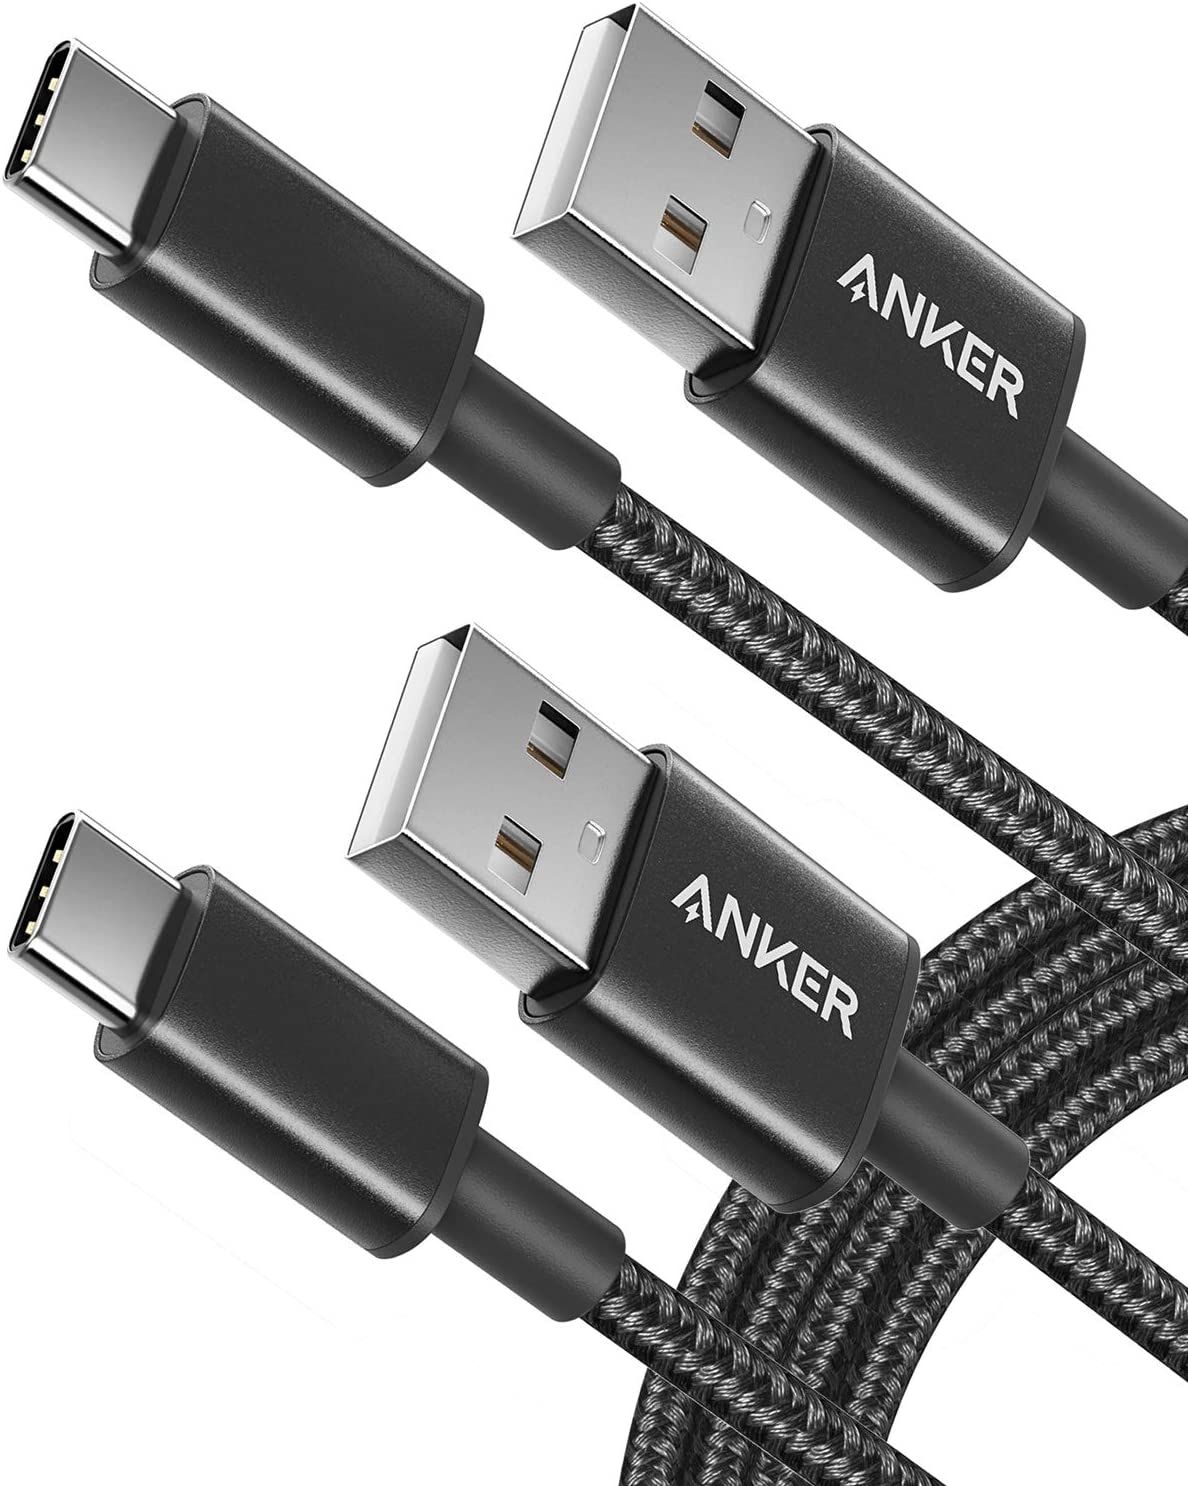 Short USB C to USB C Cable, 3.1 Gen 2 10Gbps 100W 4K USB C Video High Speed  Data Transfer Fast Charging Cord Compatibile with Samsung Galaxy T5 LaCie  SSD, MacBook, Display